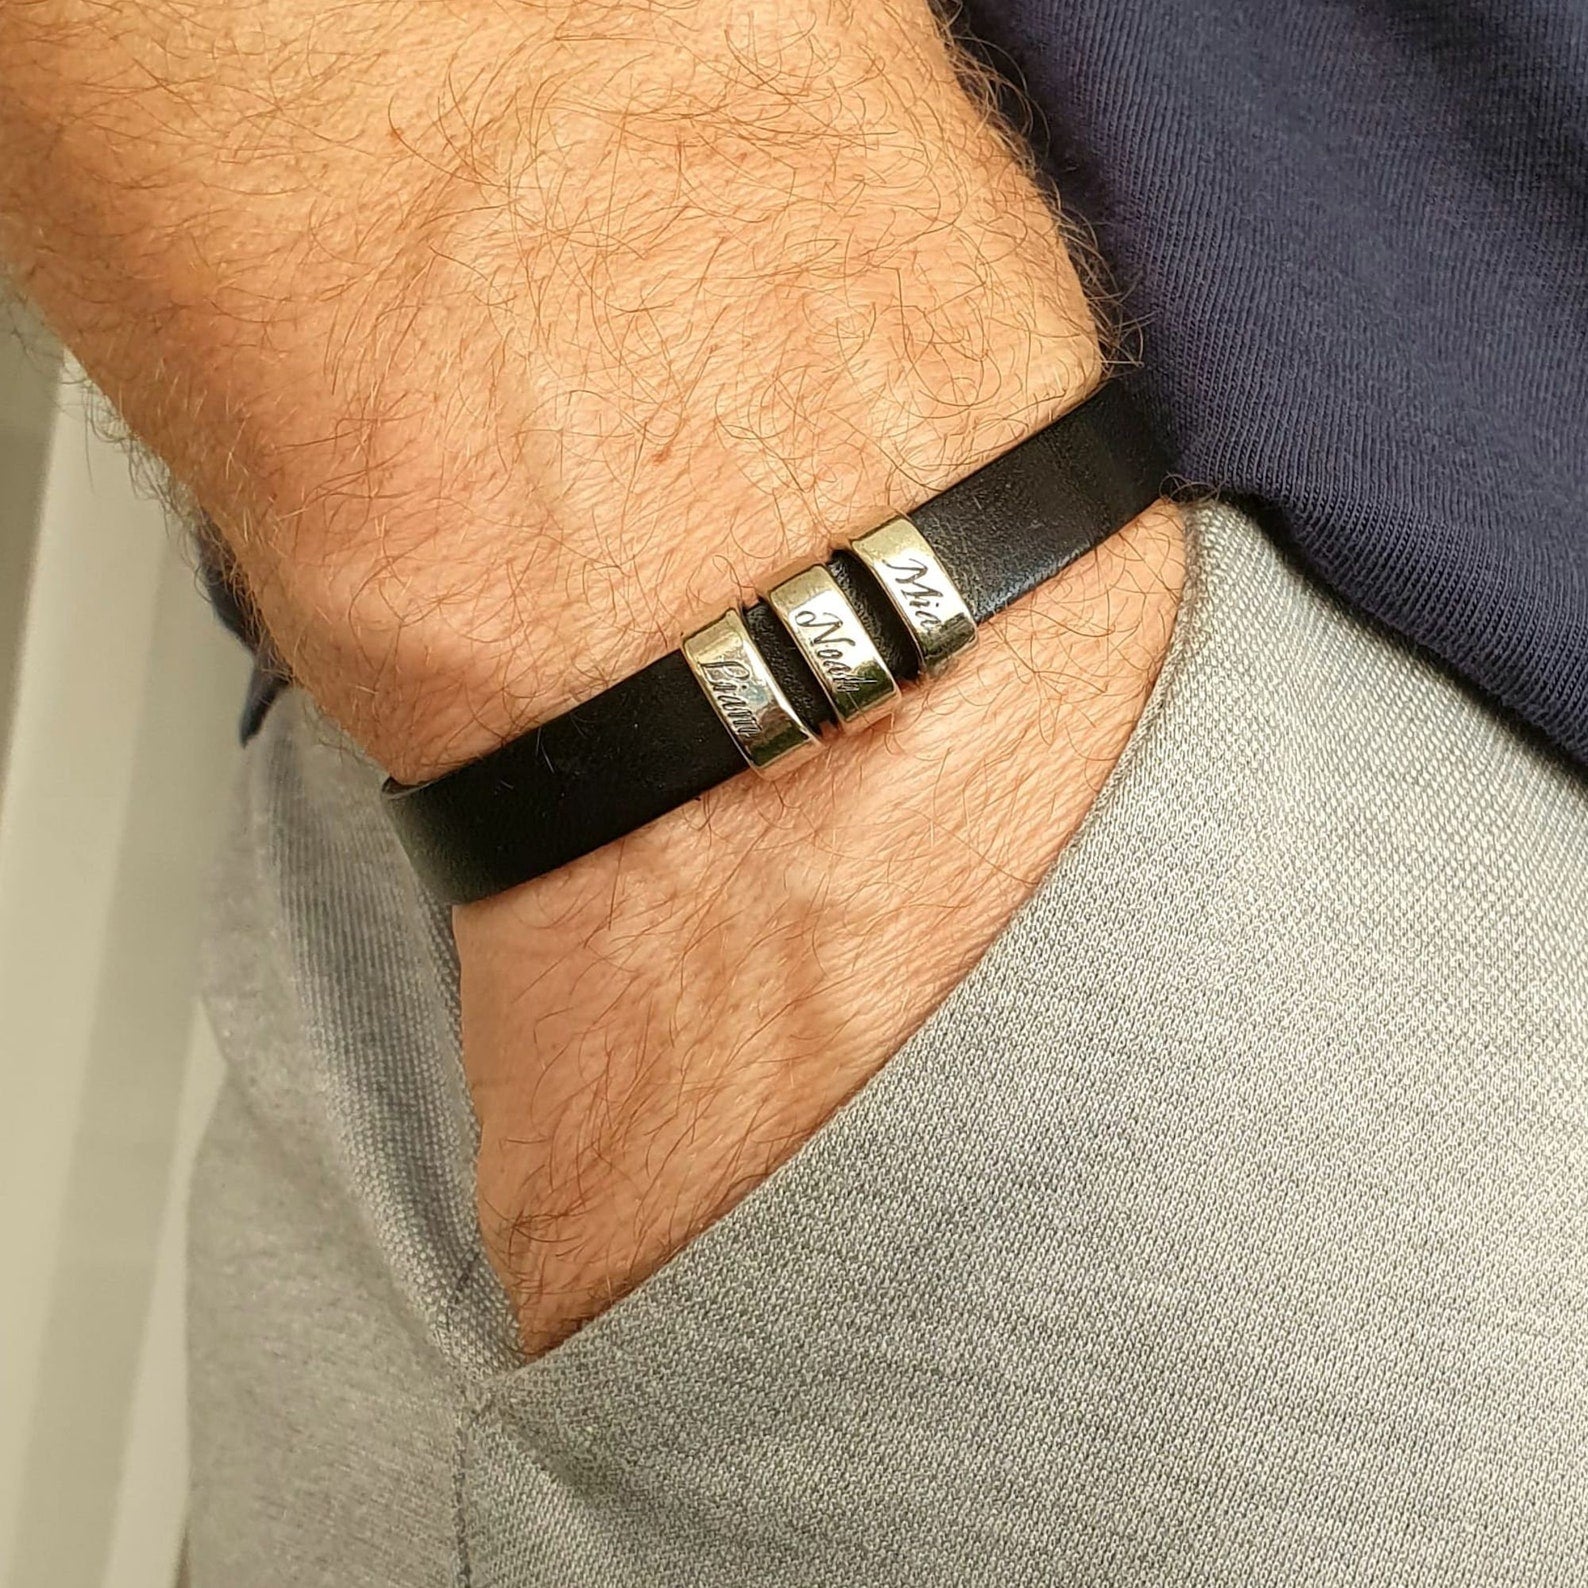 New Dad Bracelet With Baby Name